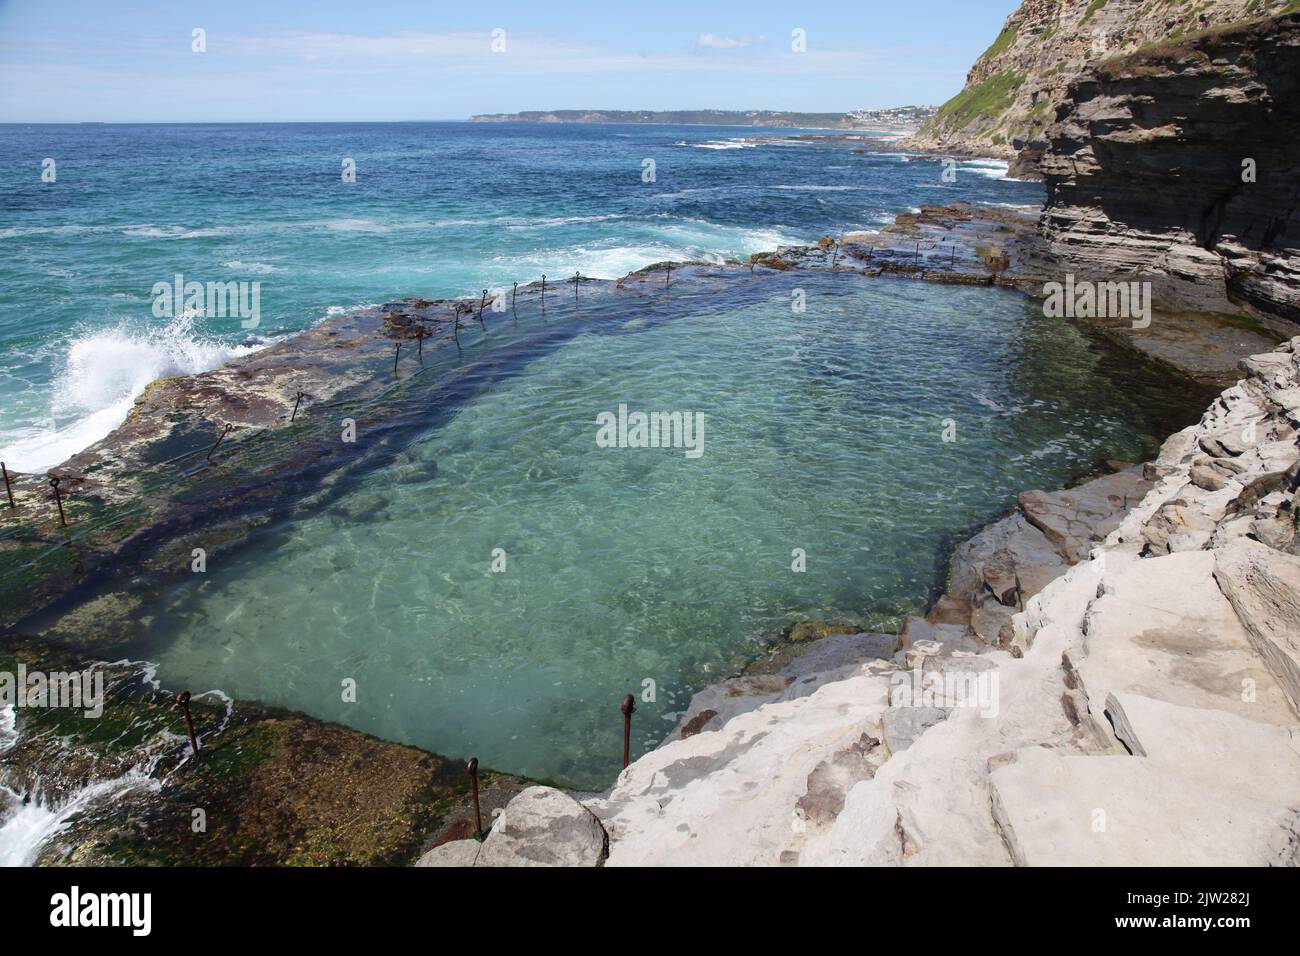 The bogie hole an ocean bath built in the 19th century using convict labour. It is one of the oldest ocean baths in Australia. The Bogie Hole - Newcas Stock Photo